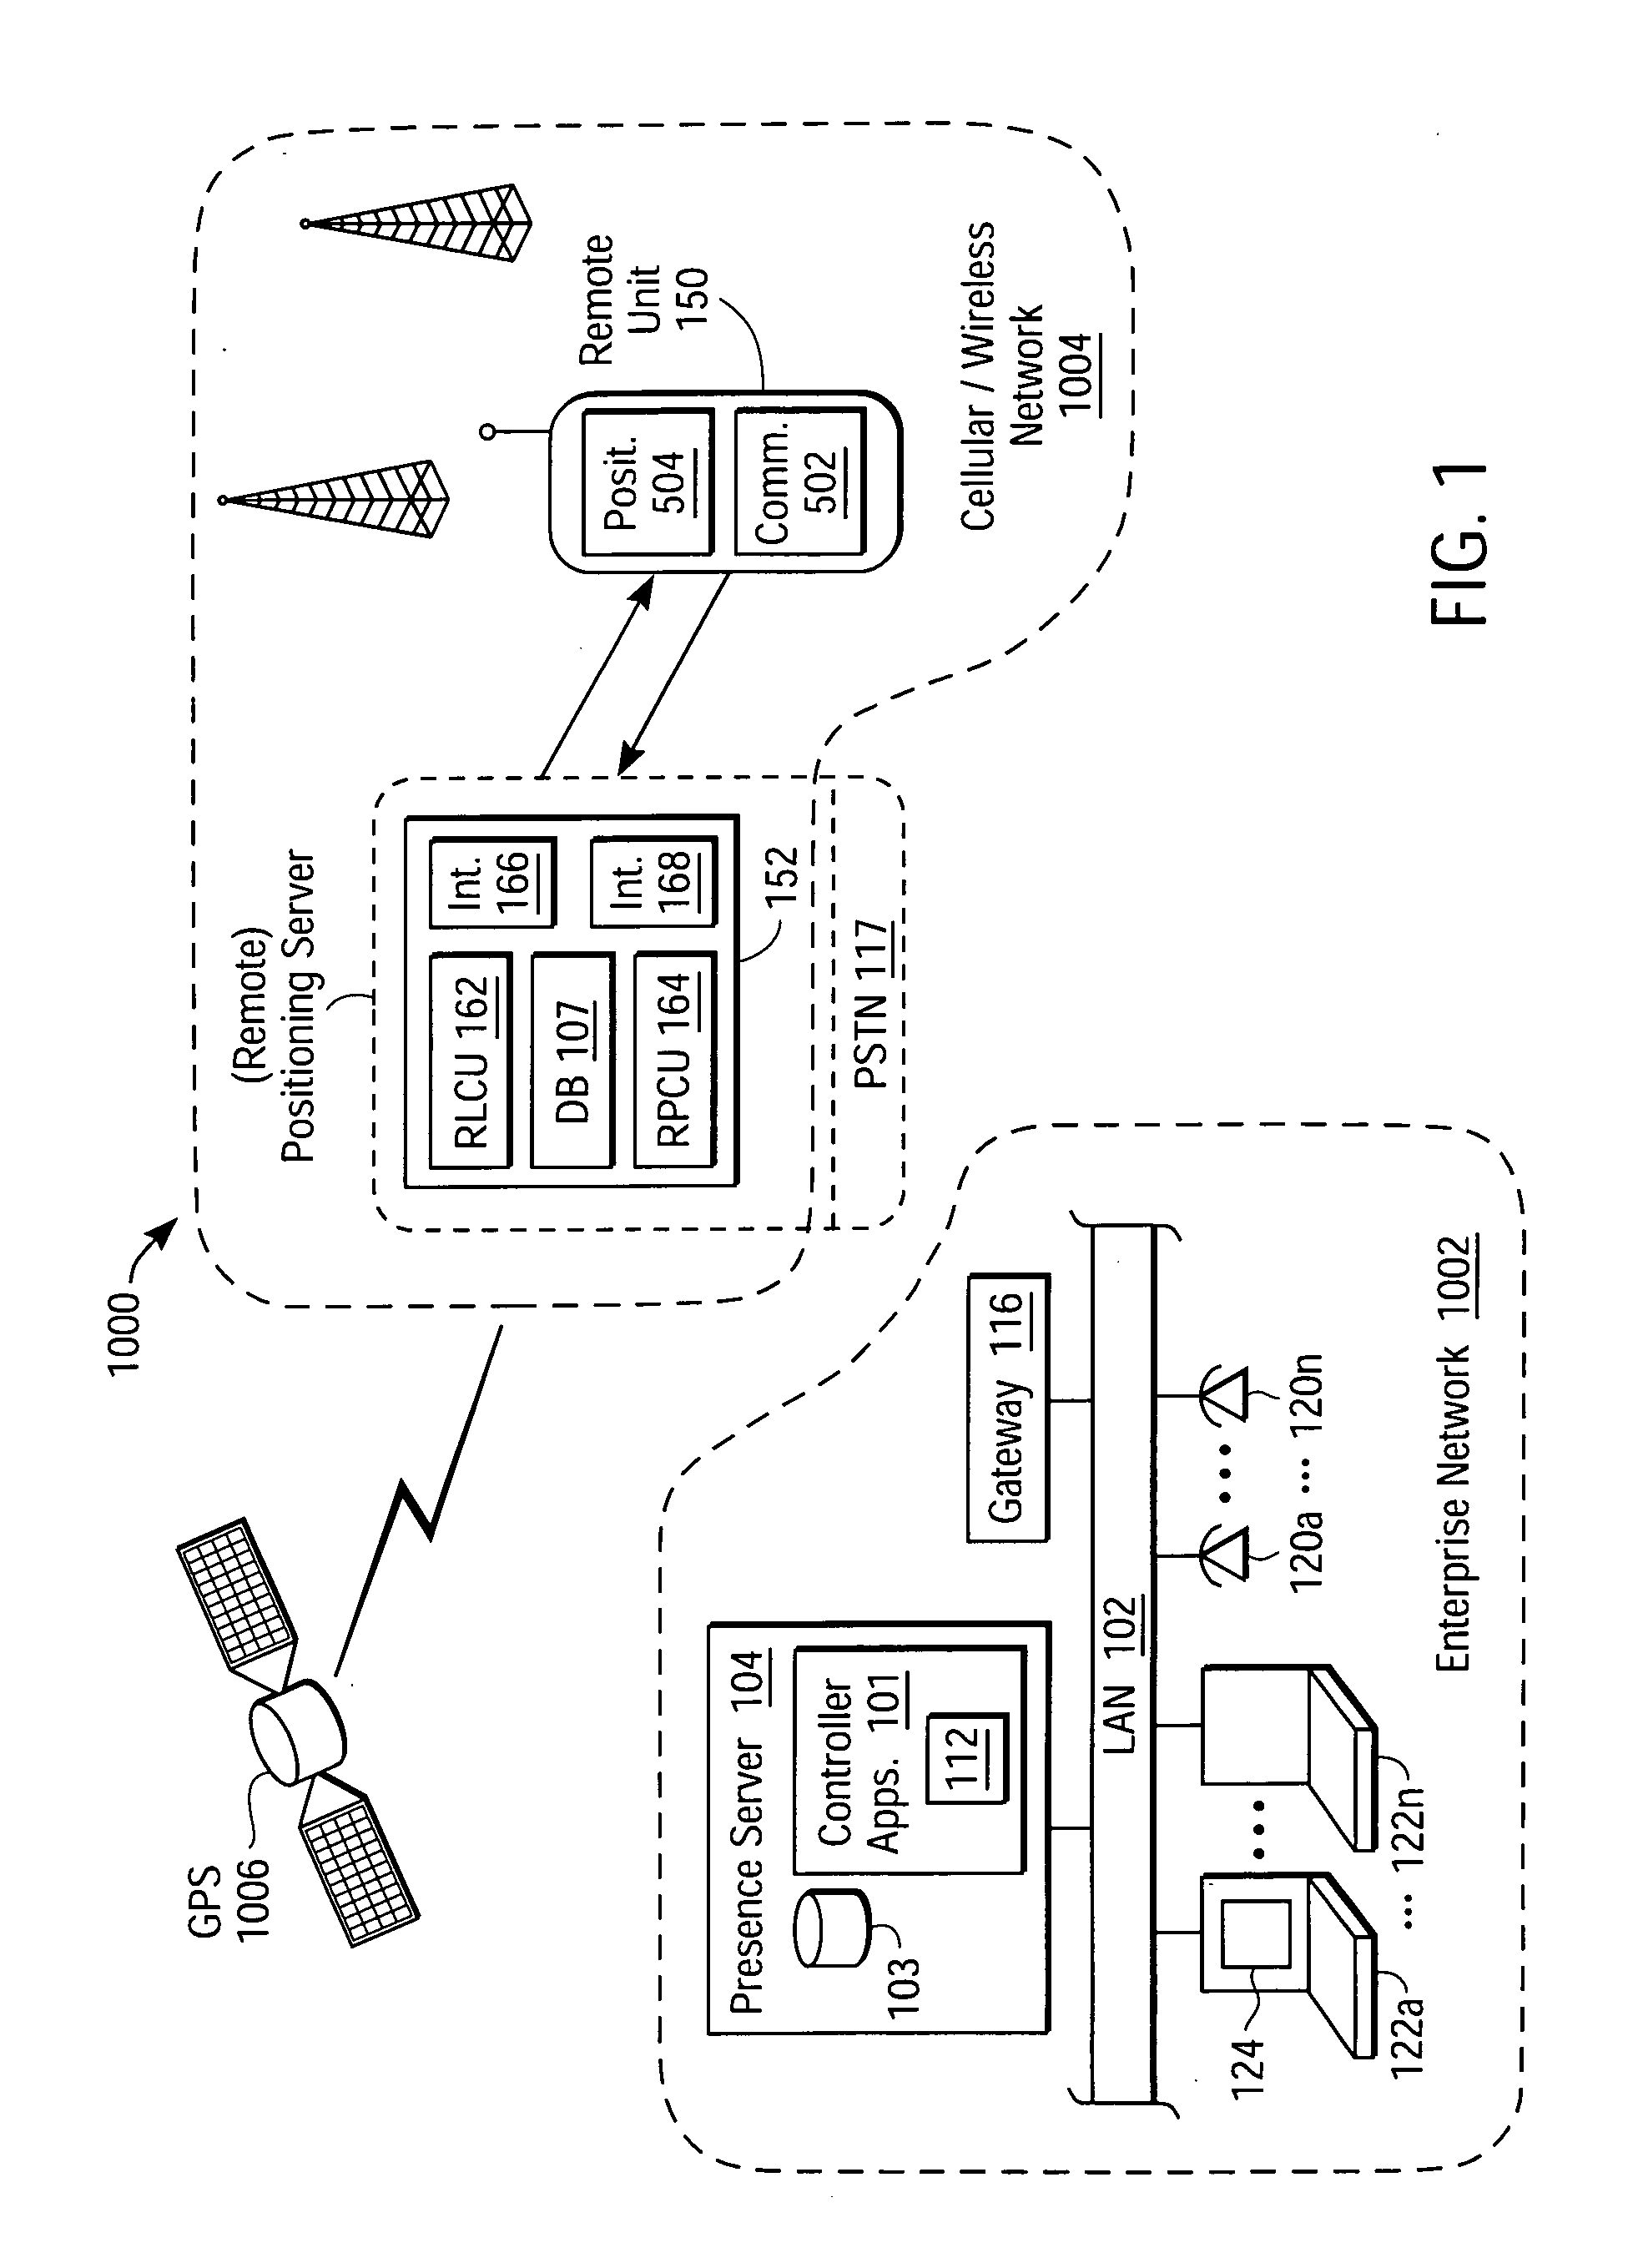 System and method for centrally-hosted presence reporting